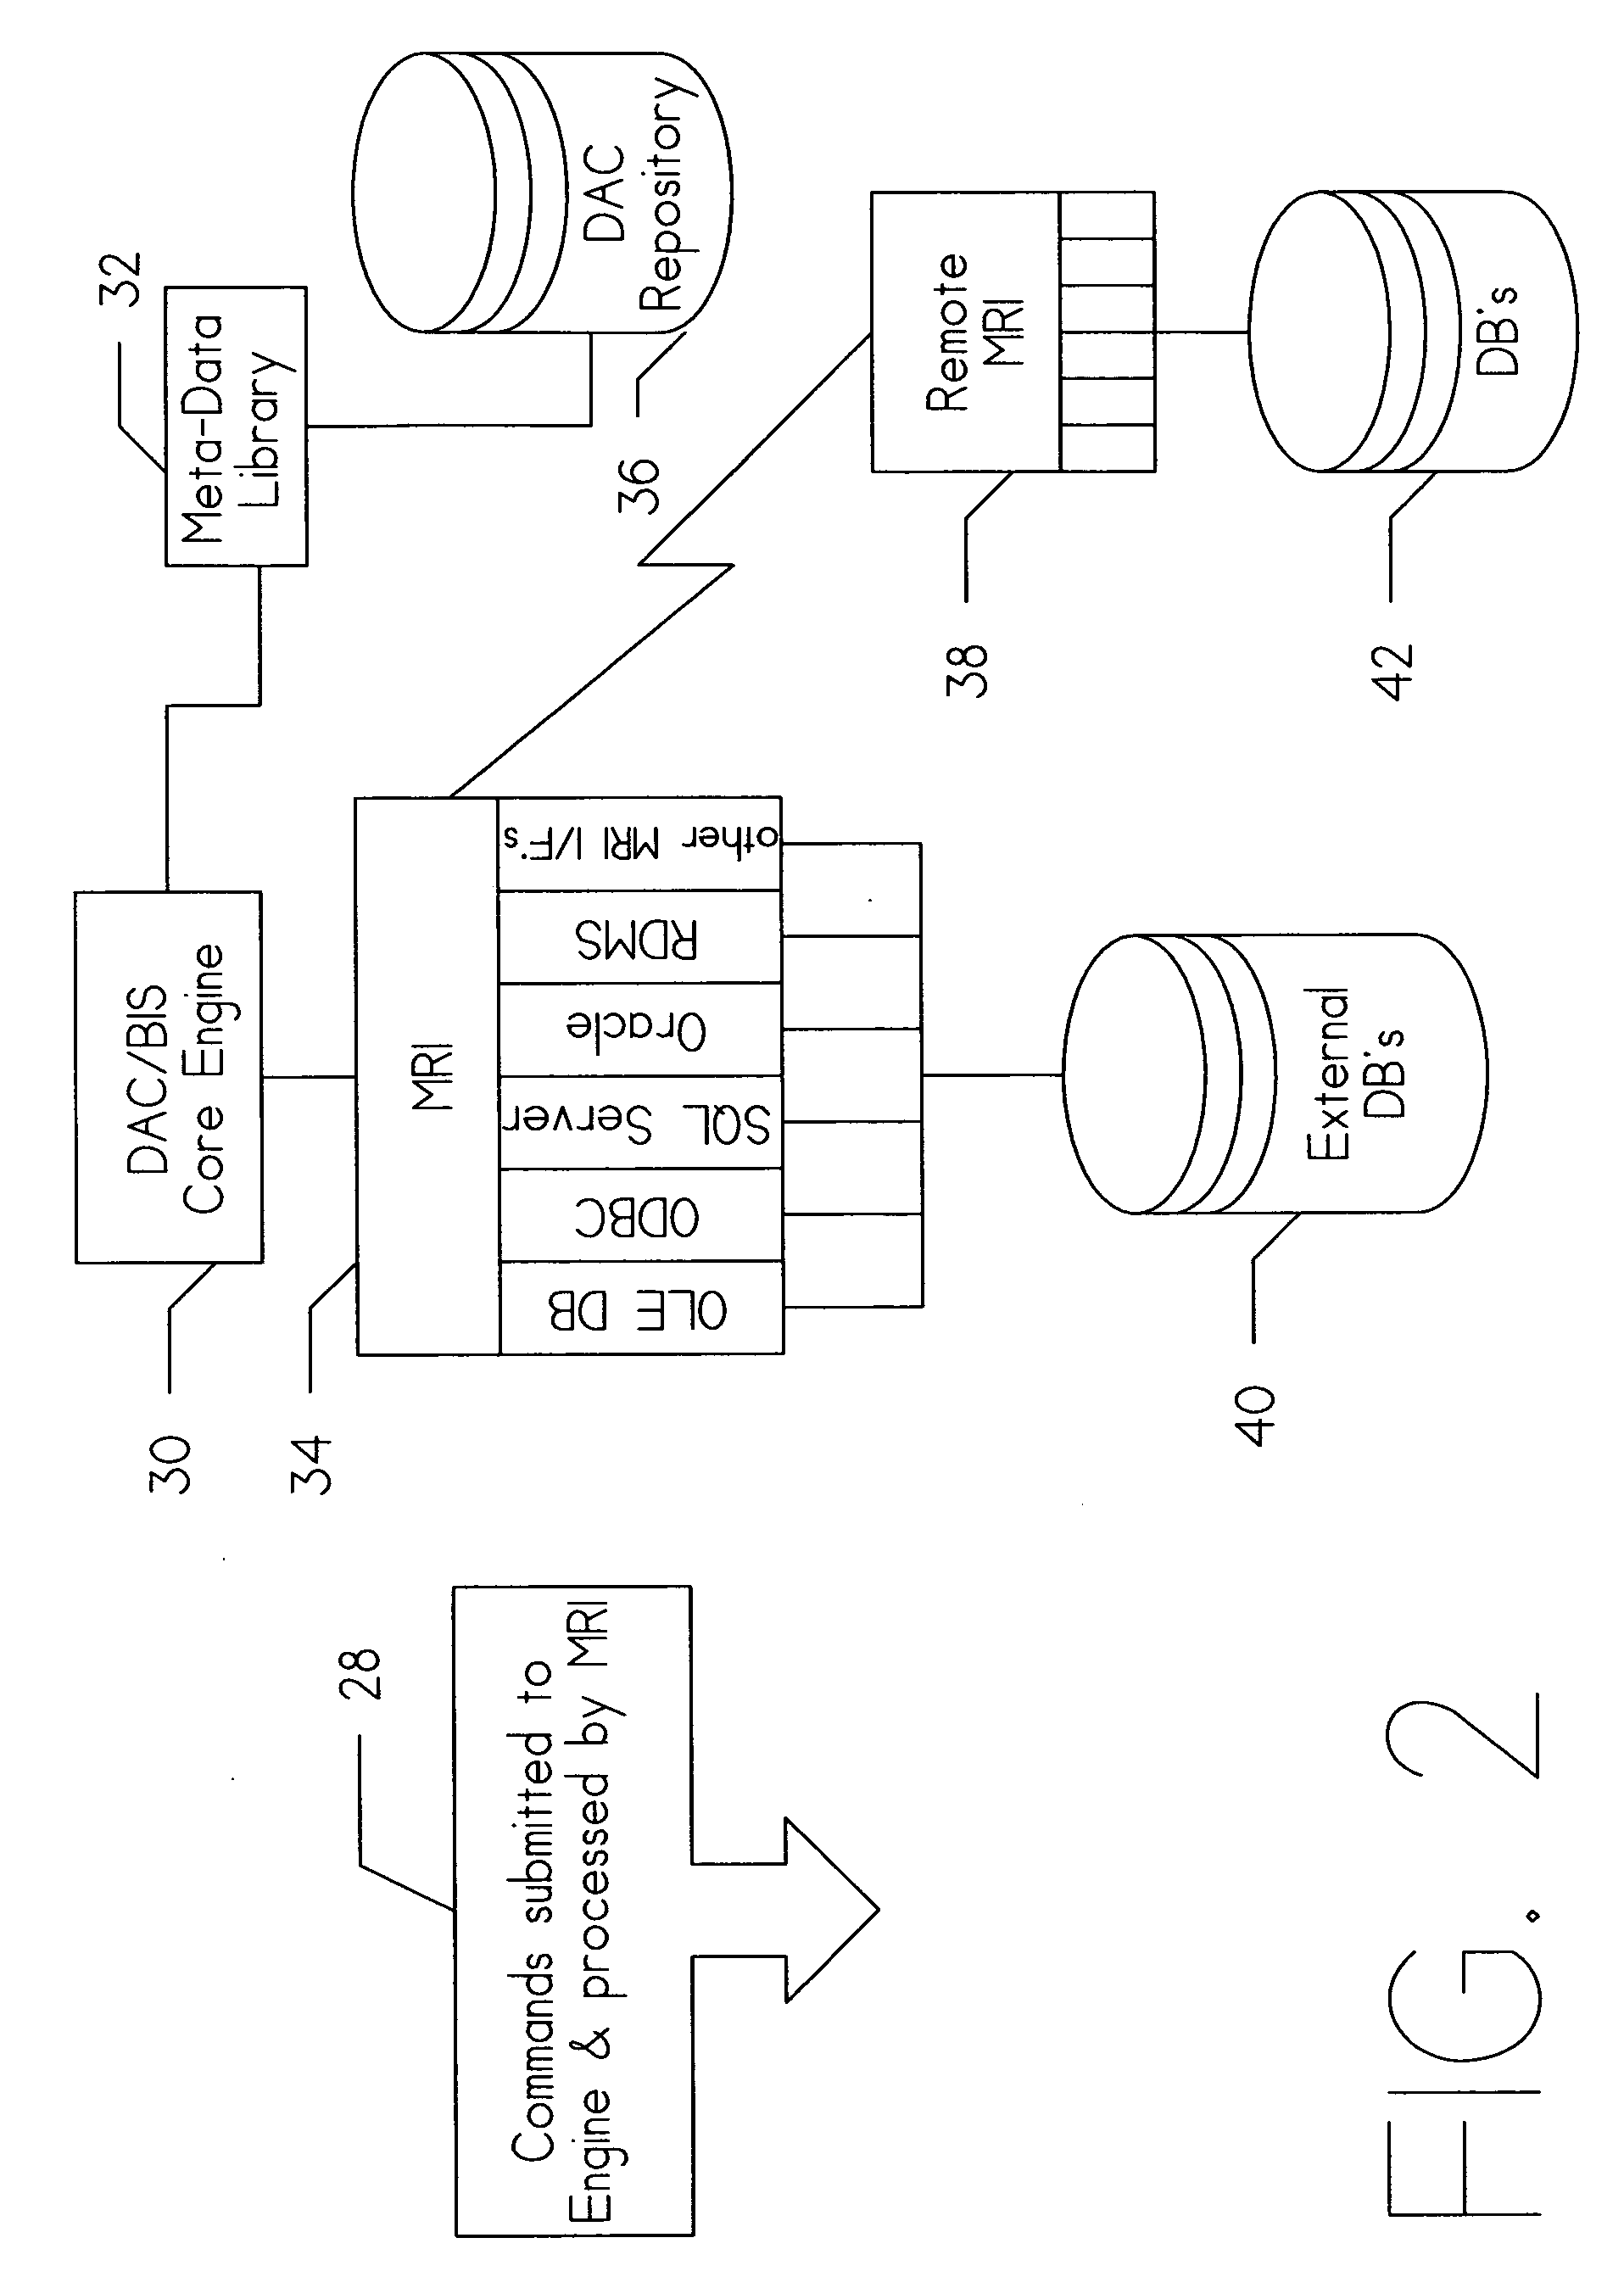 Method and apparatus for mapping data types from heterogeneous databases into a single set of data types